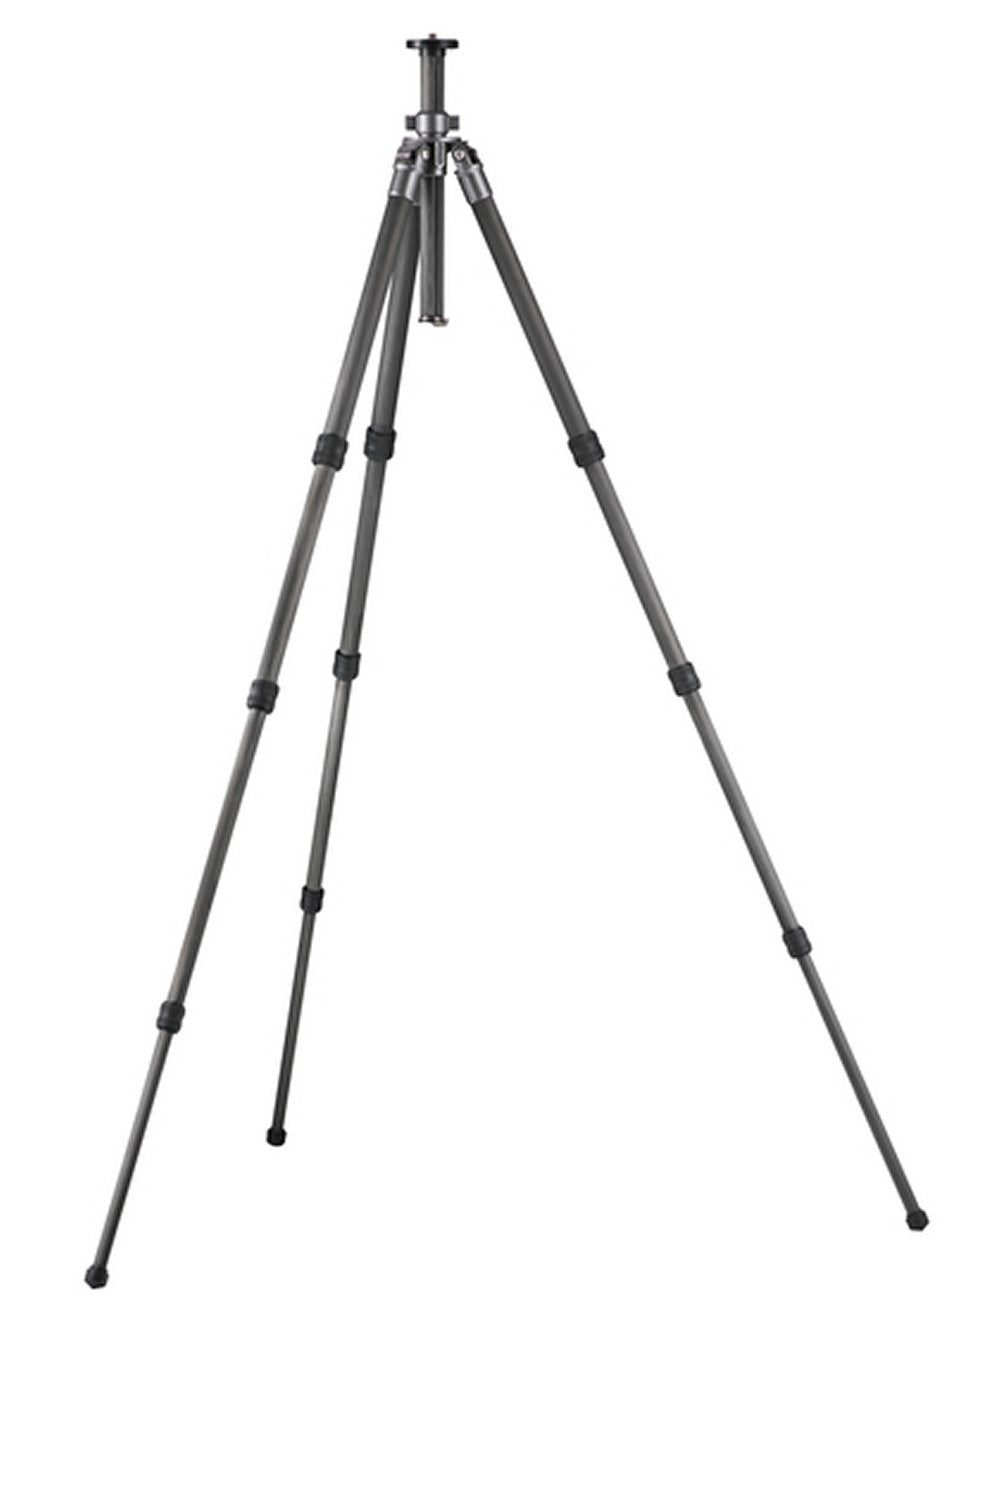 Gitzo GT2541 Series 2 Carbon 6X4 Section Tripod with G-Lock Replaces G